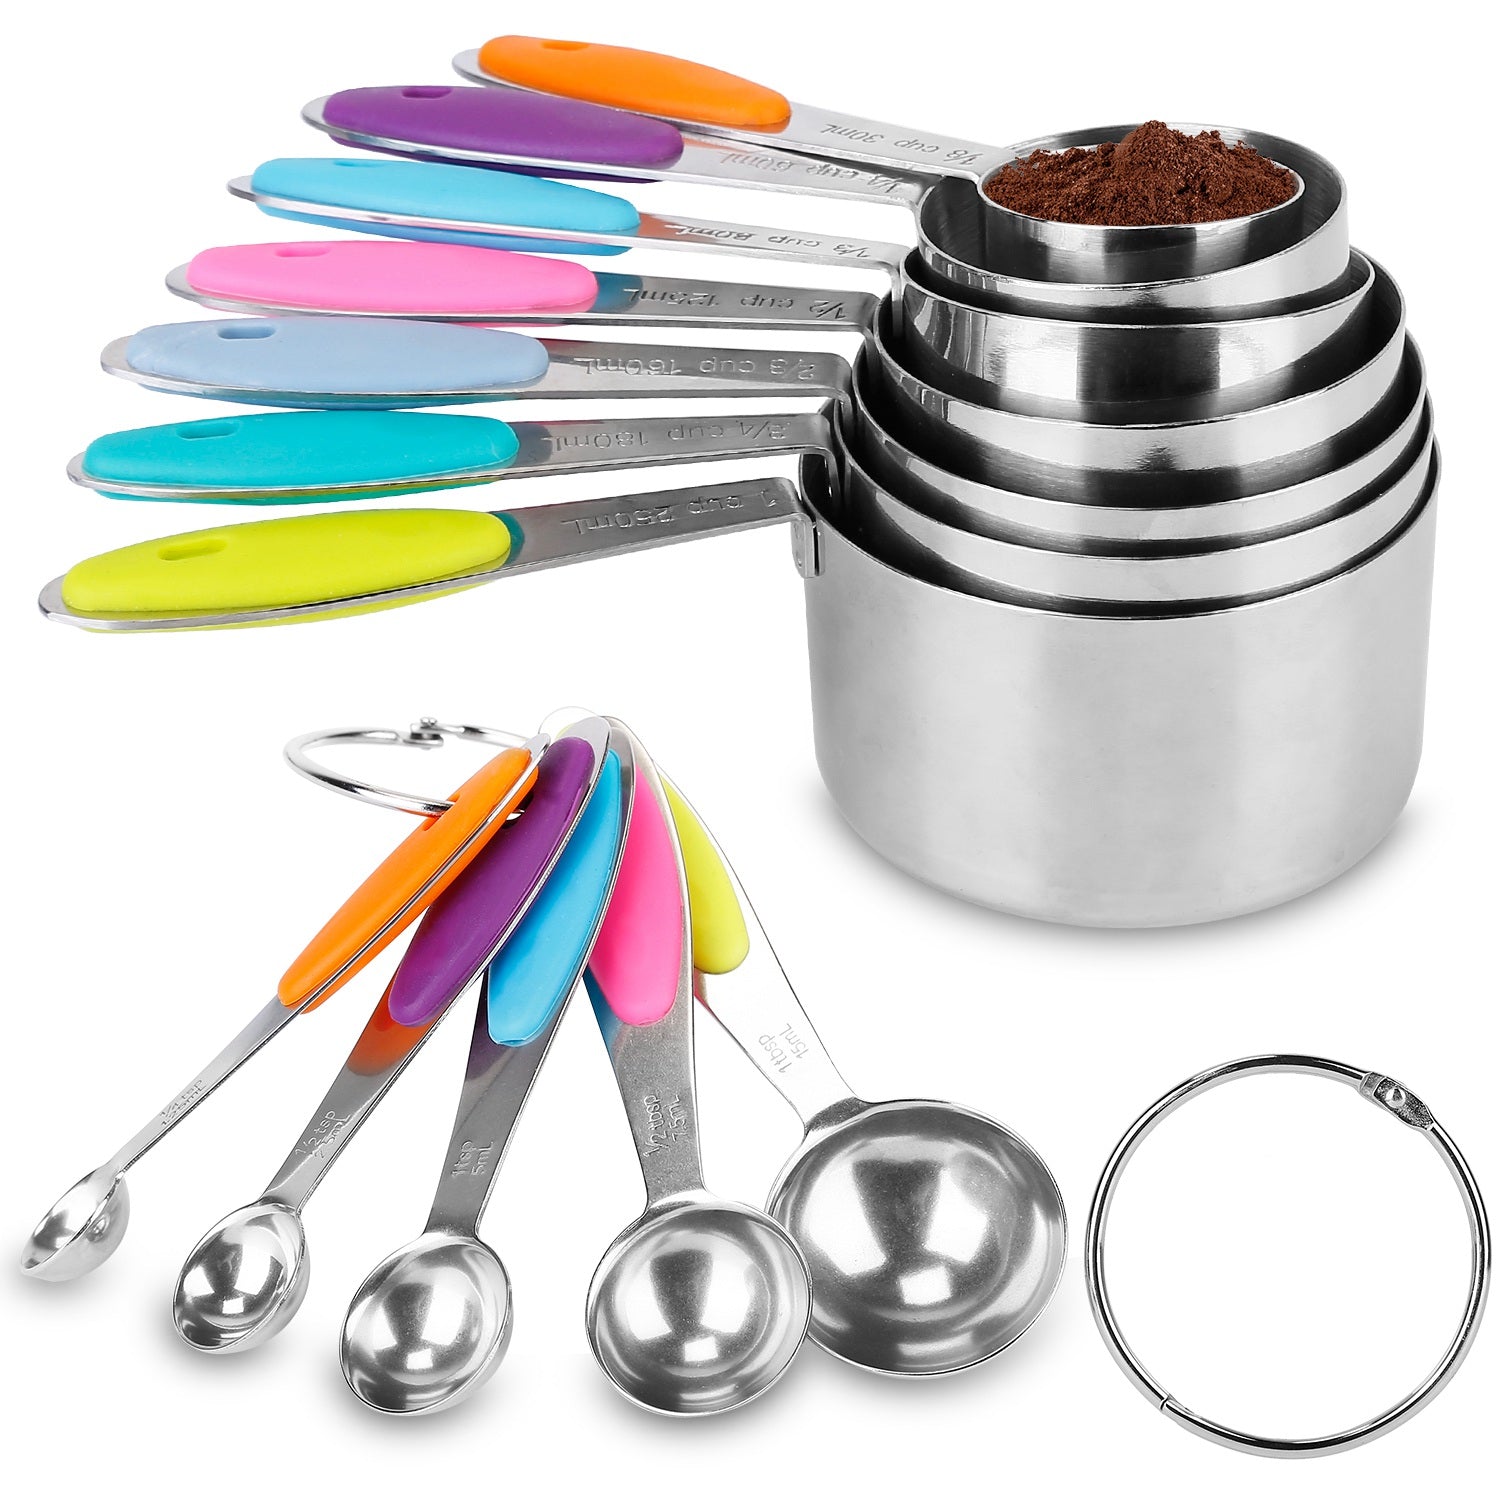 http://dailysale.com/cdn/shop/products/12-piece-stainless-steel-measuring-cups-spoons-set-kitchen-tools-gadgets-dailysale-993364.jpg?v=1649800978